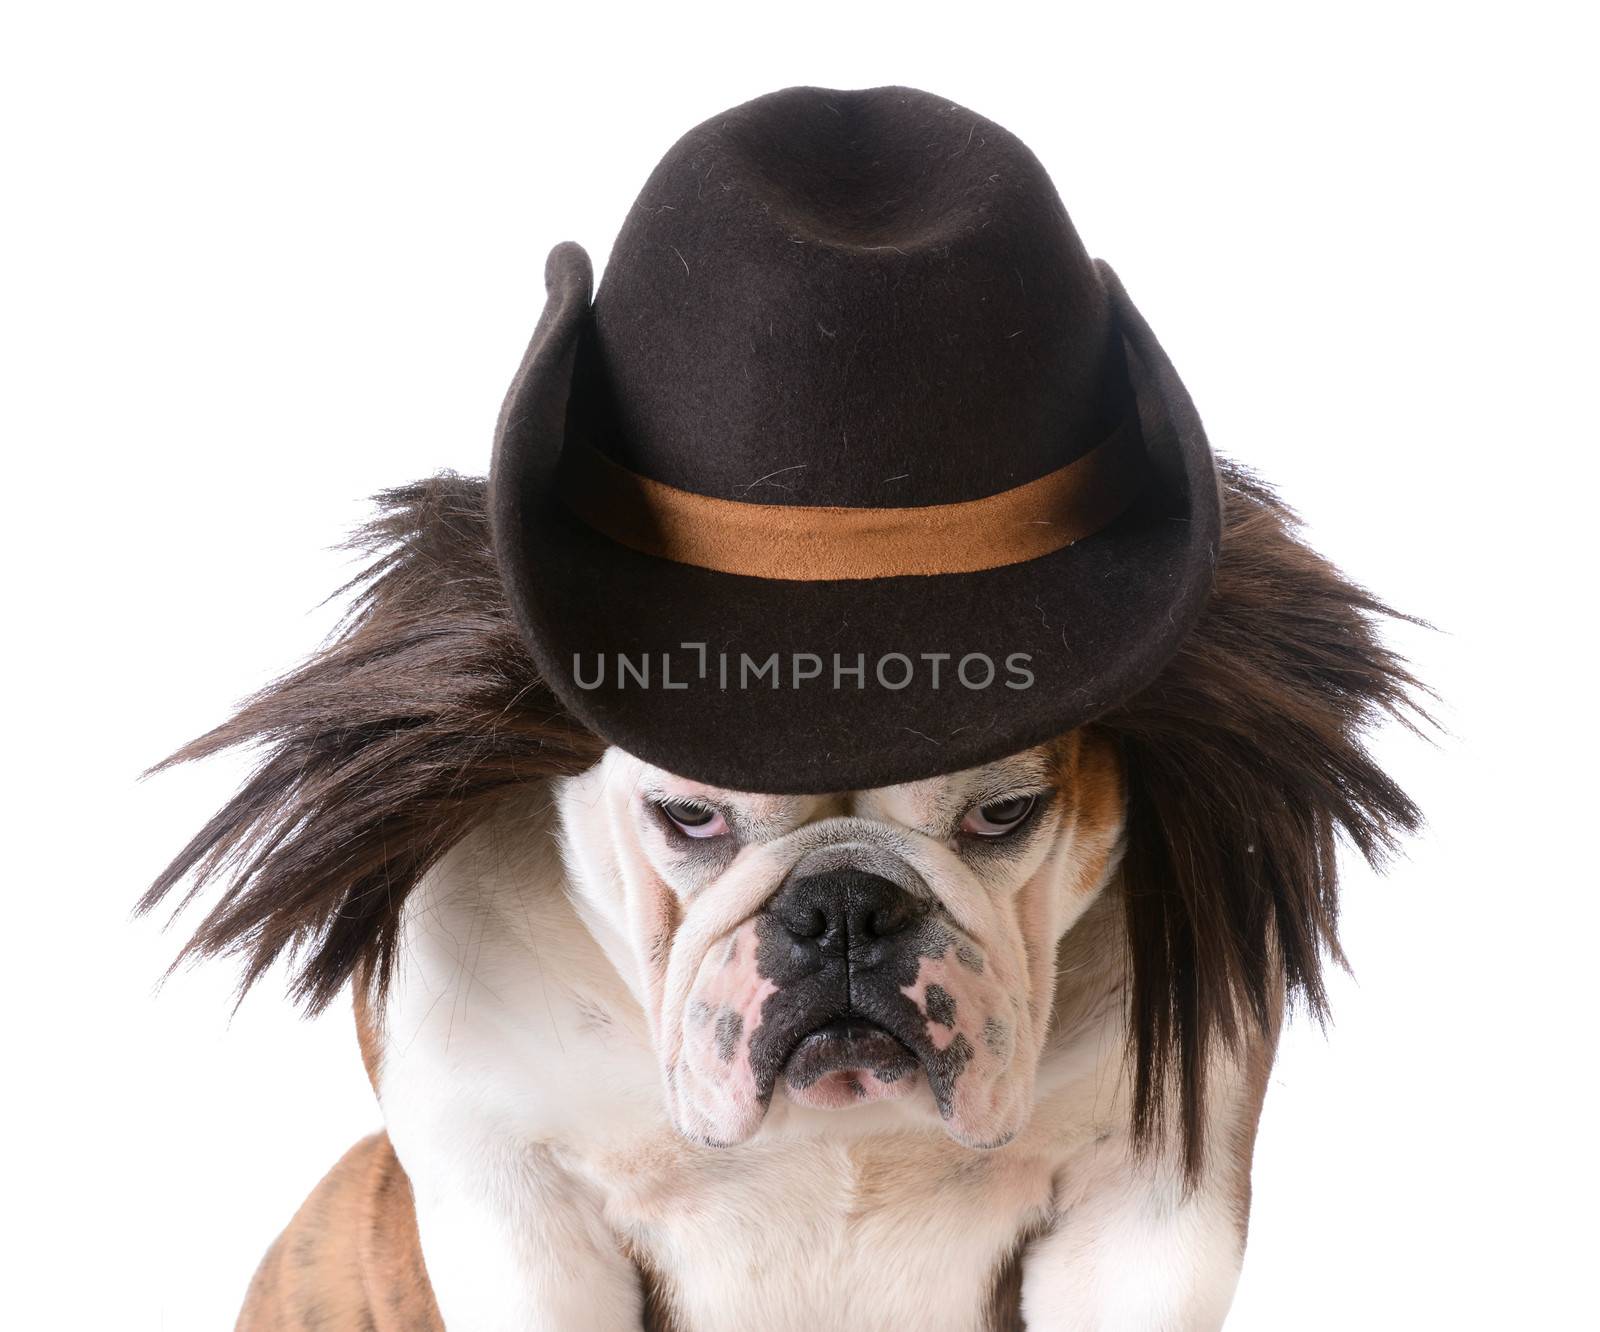 funny dog wearing western hat and wig on white background